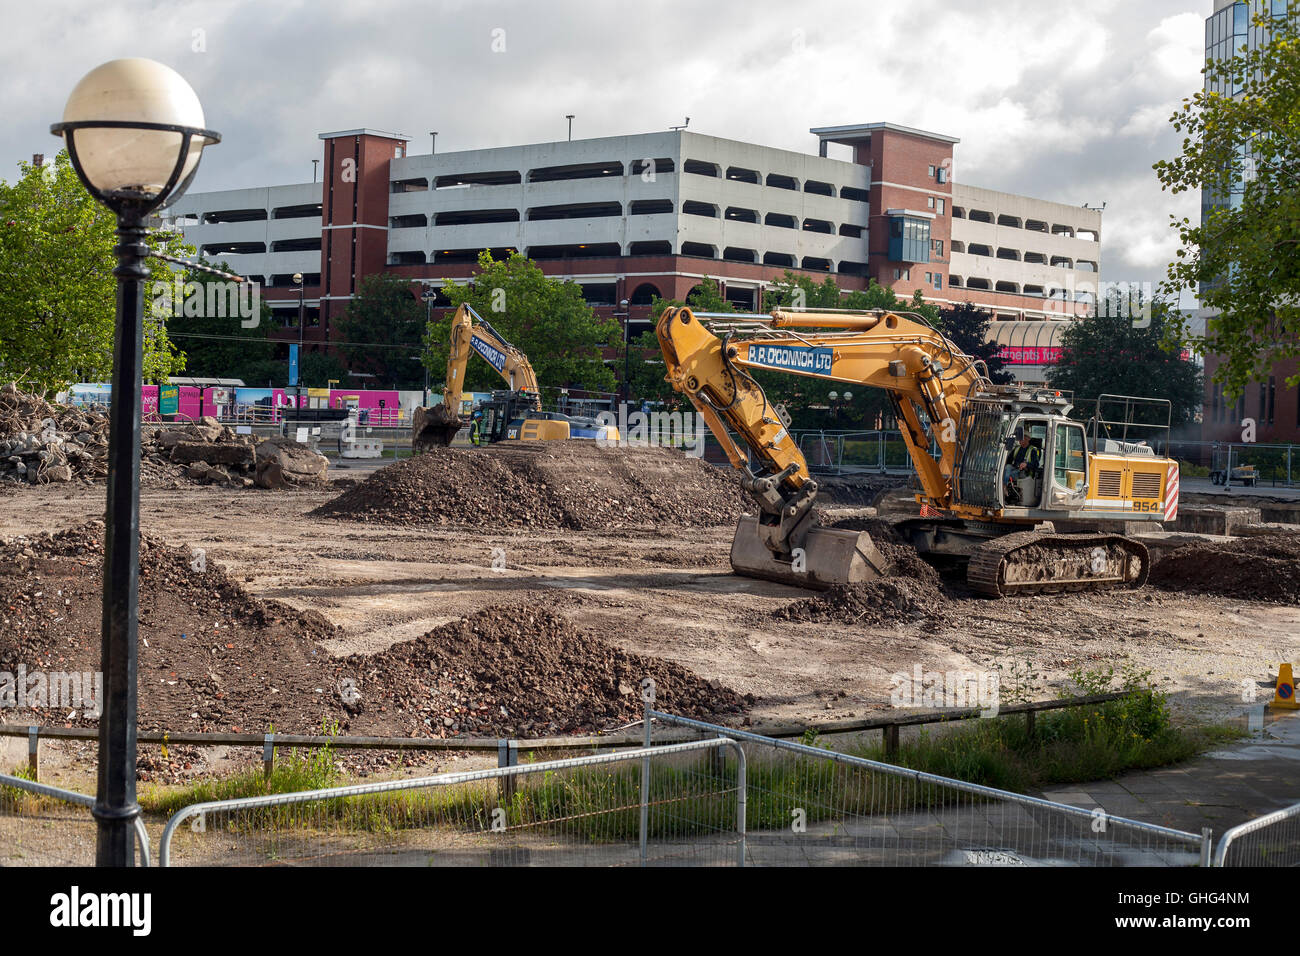 Construction Work Begins on the New Bupa Offices MediaCity Salford Quays Stock Photo